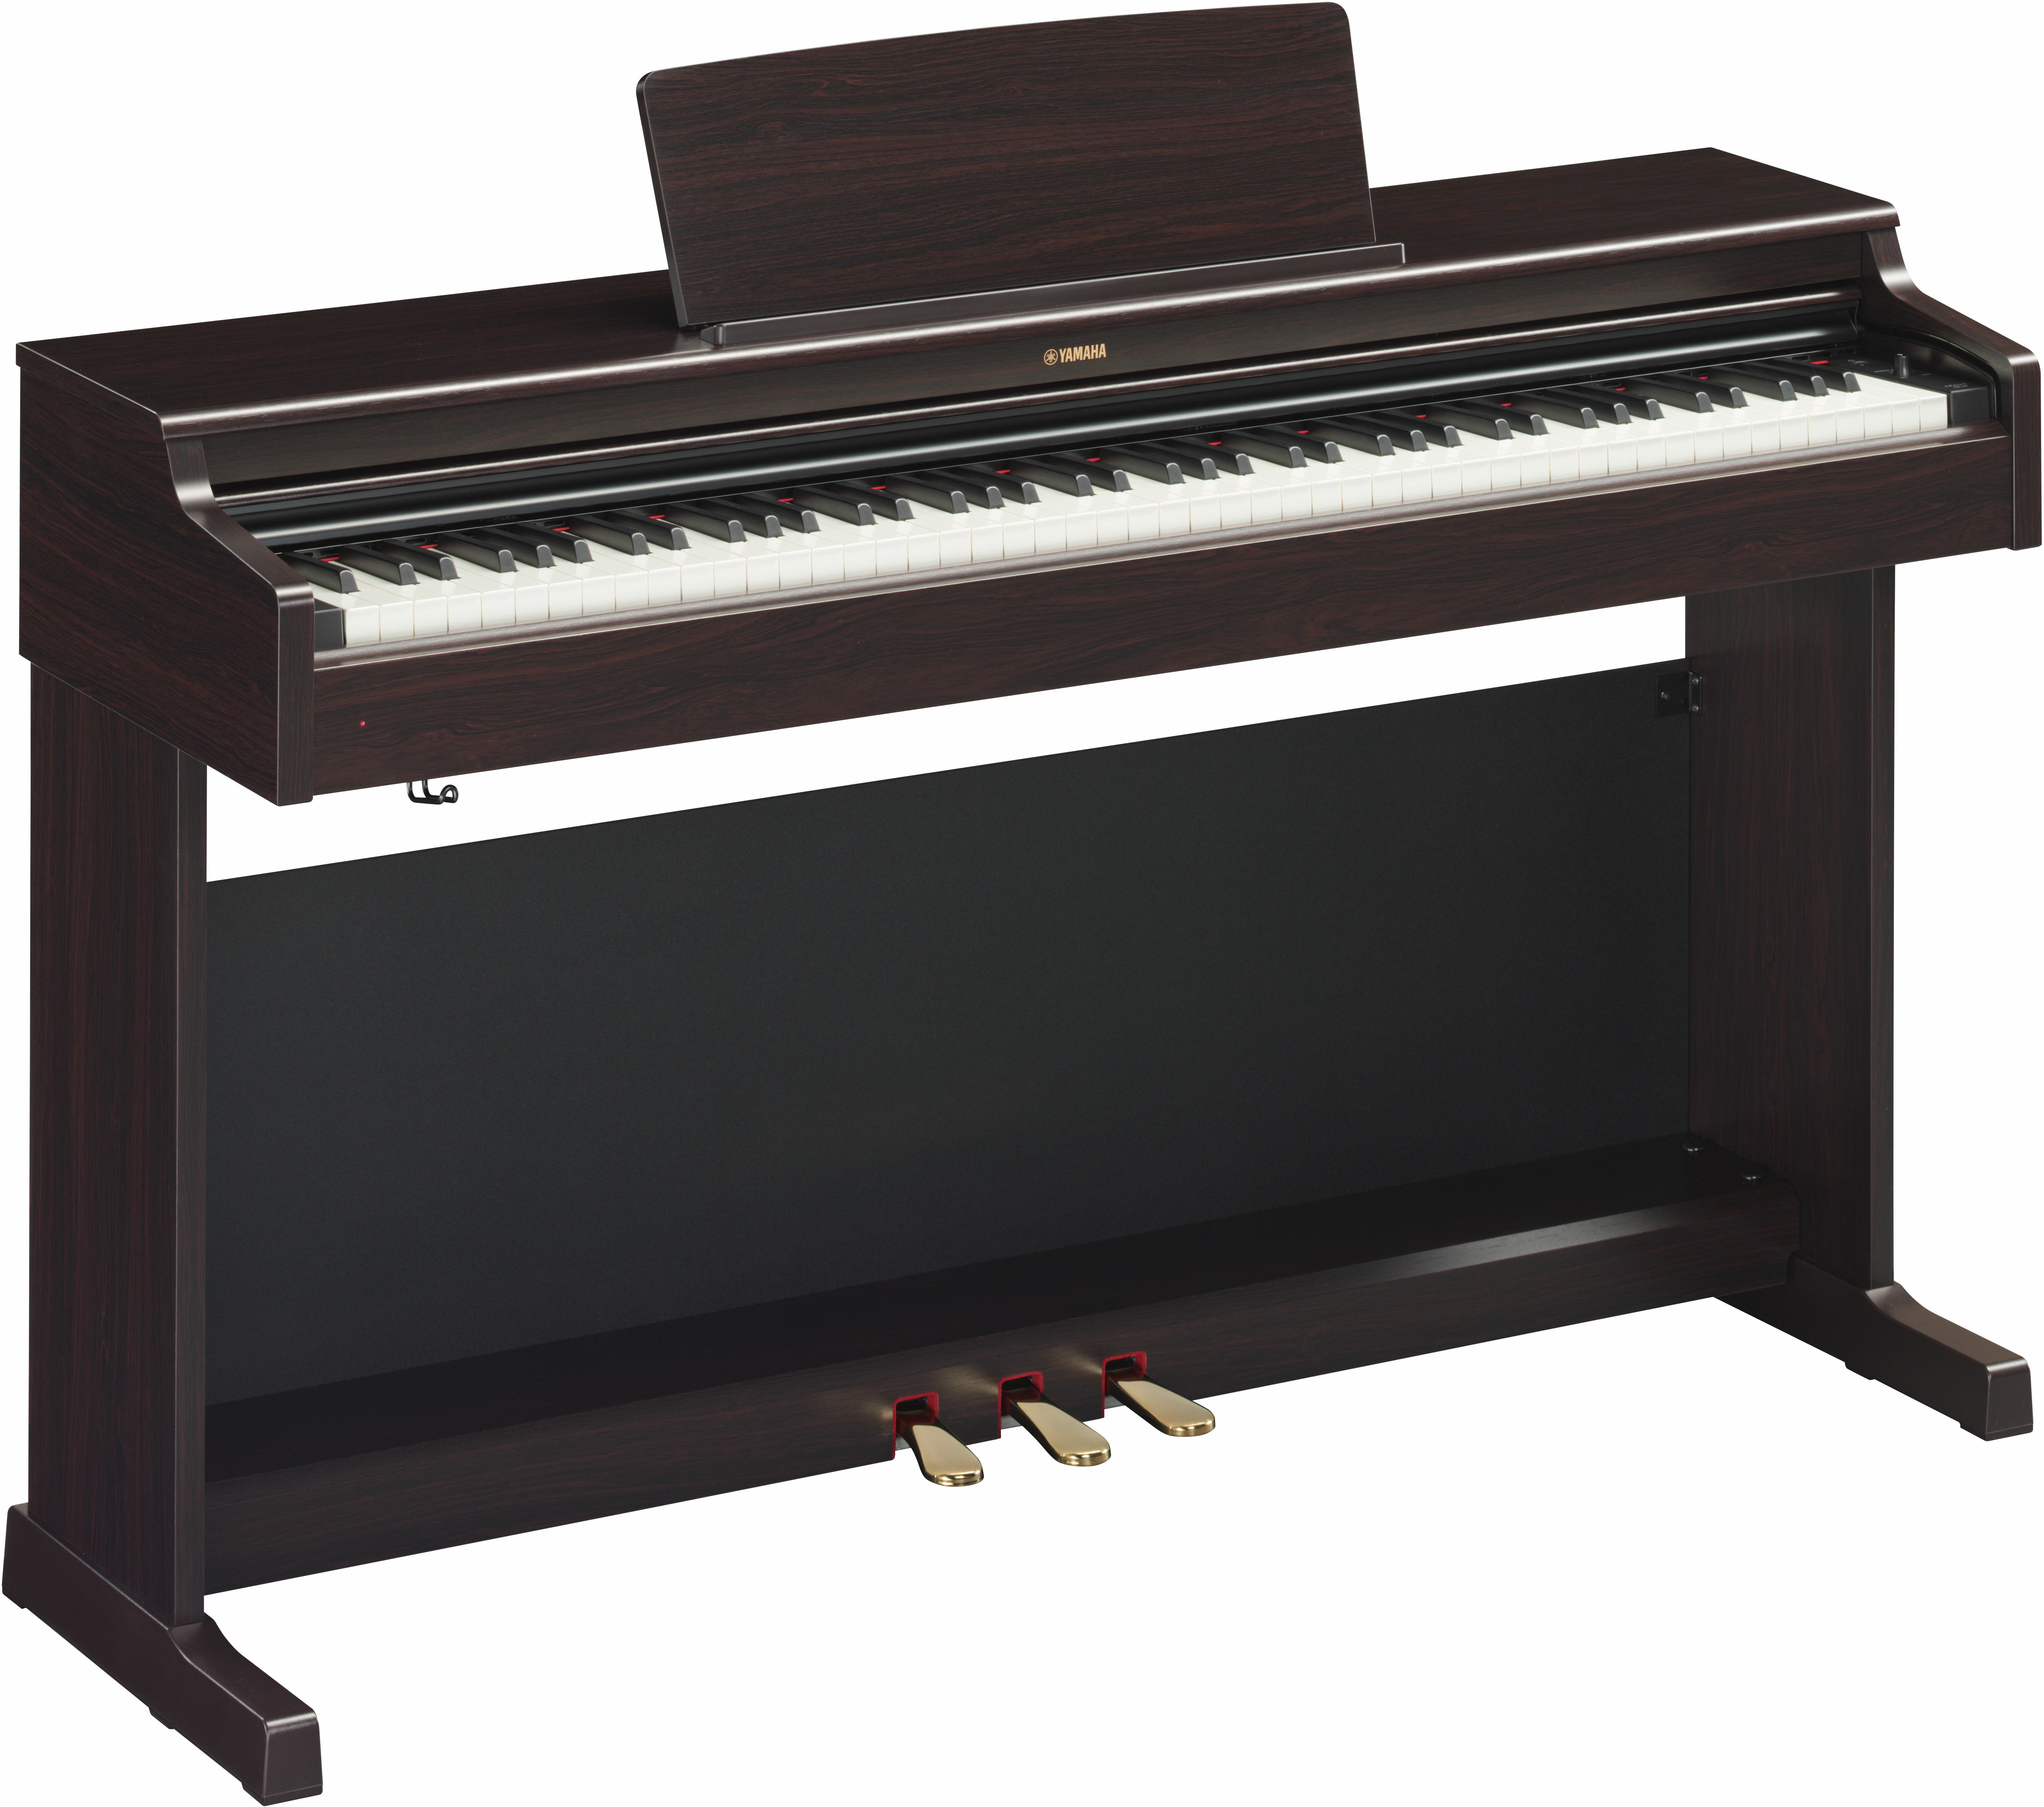 Yamaha Ydp-164 Arius - Rosewood - Digital piano with stand - Main picture